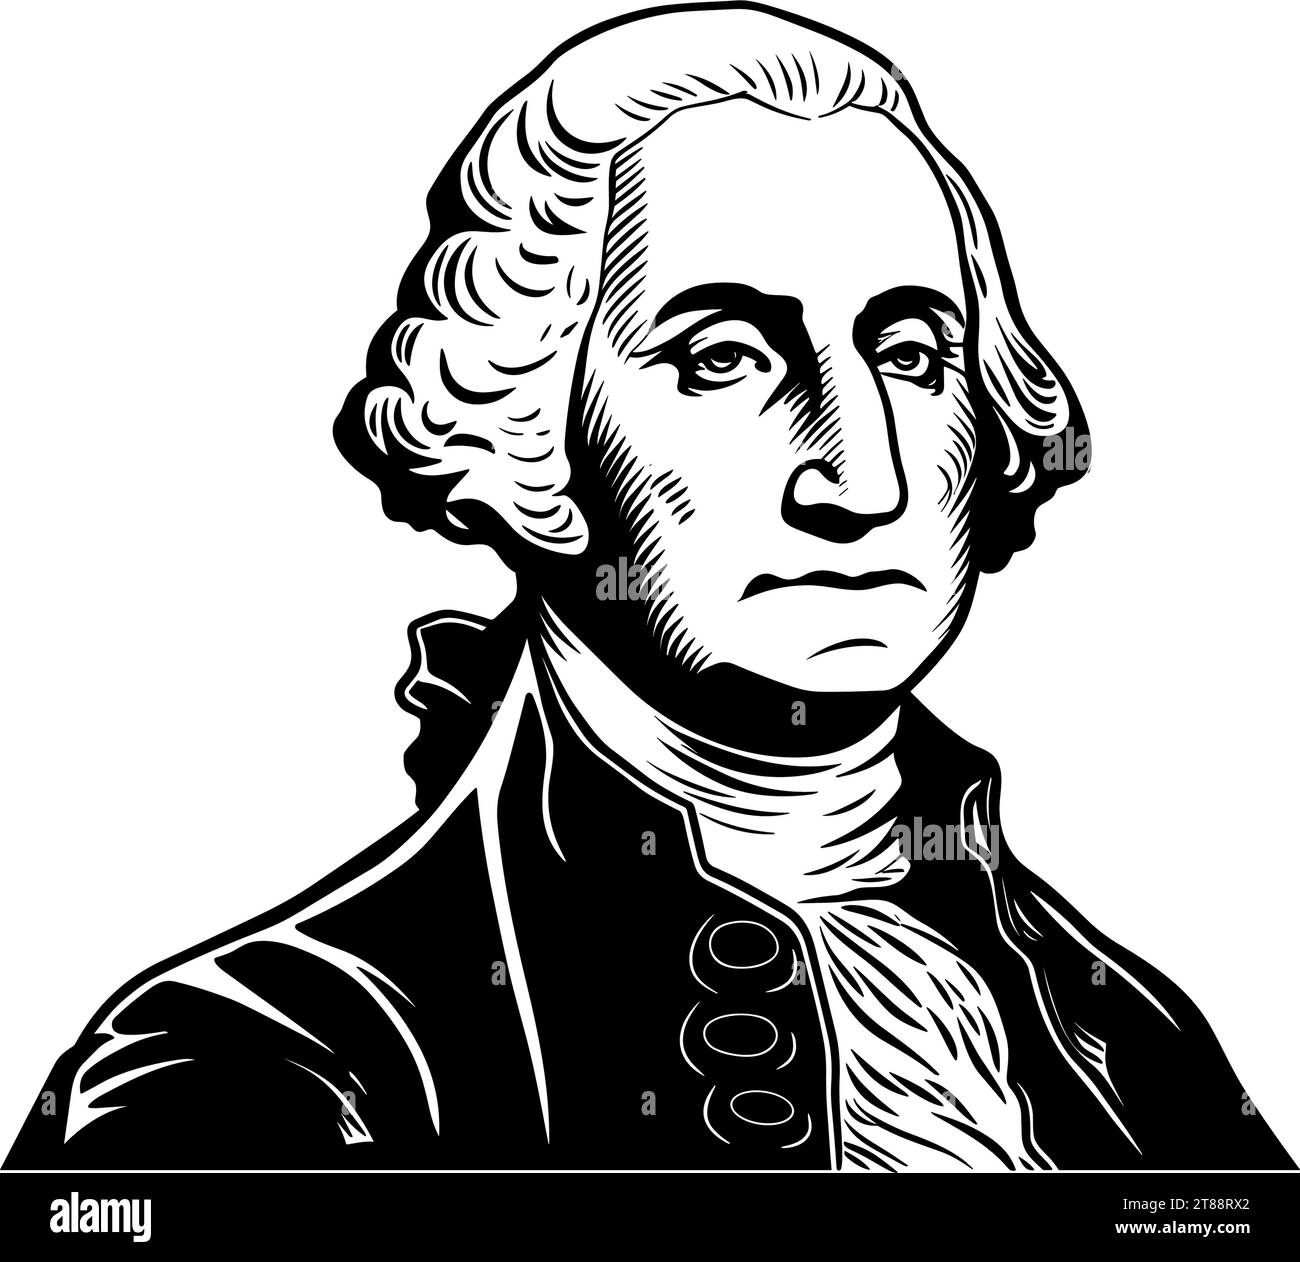 A Black And White Drawing Of A Man - George Washington Stock Vector ...